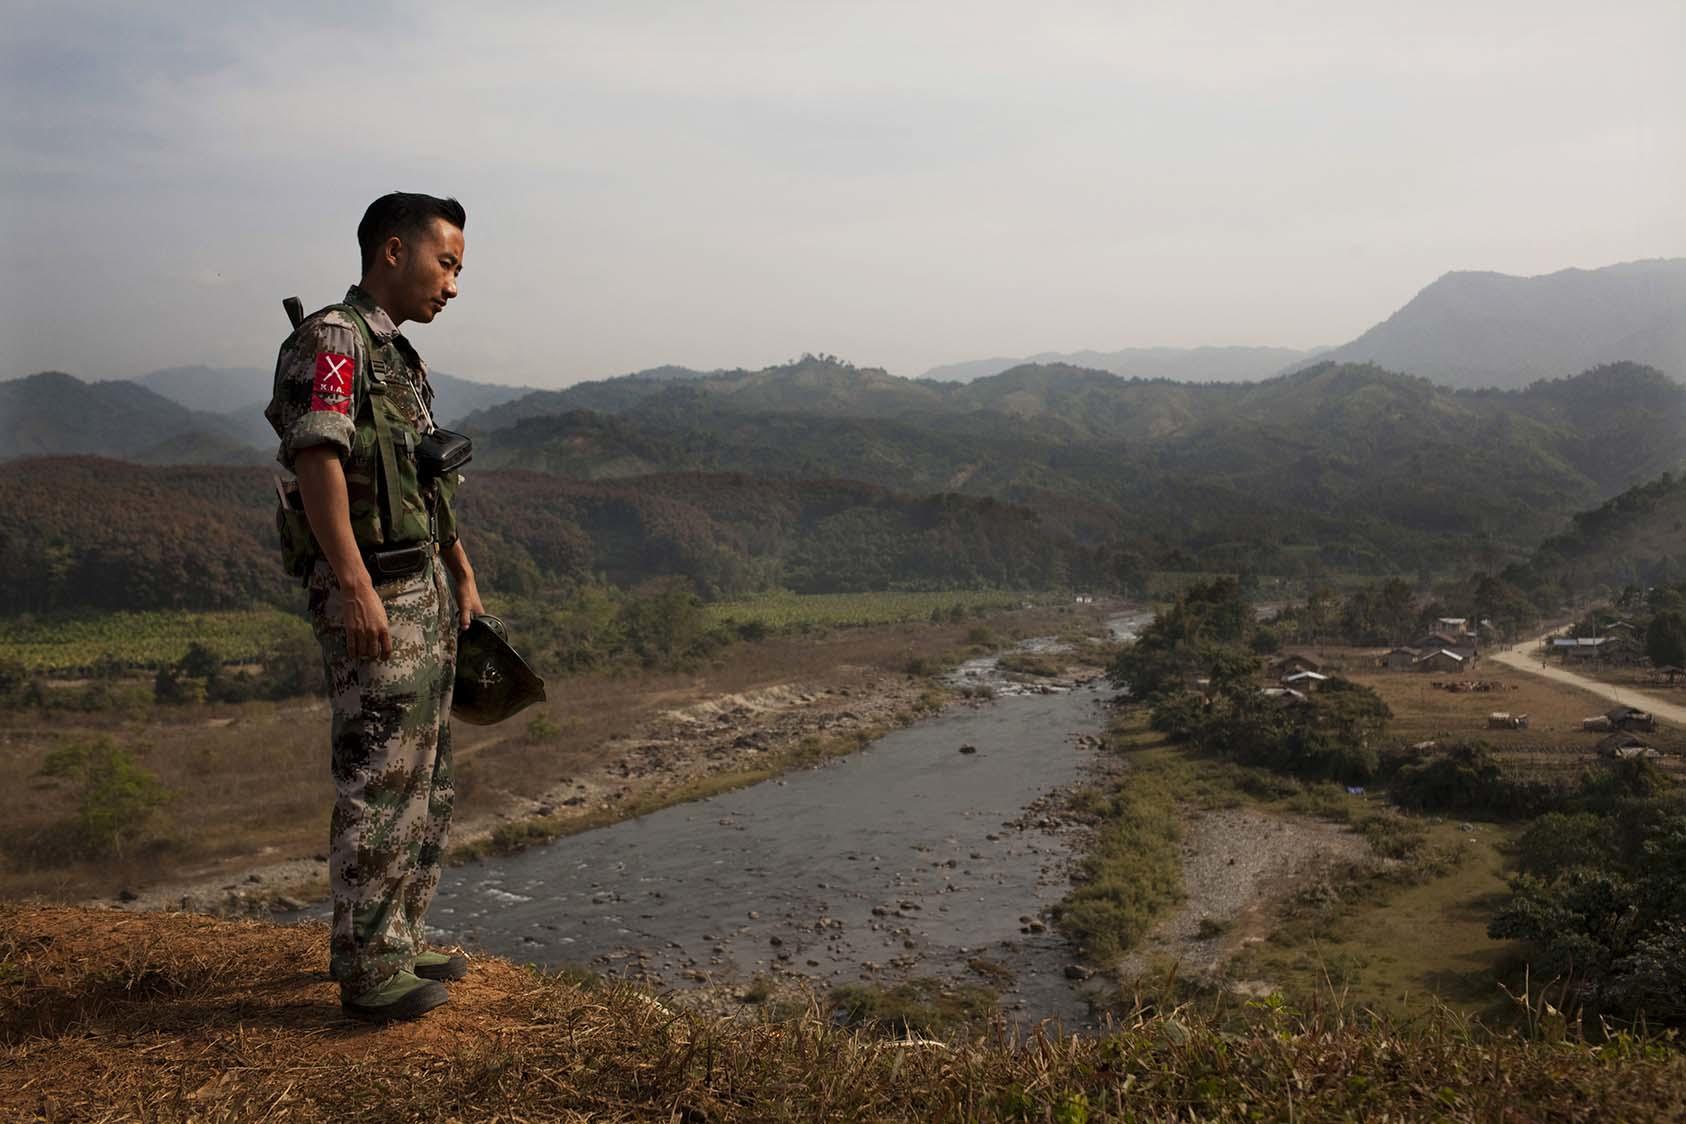 A Kachin Independence Army soldier watches over a river valley separating Myanmar from China on a base near Laiza, Myanmar, Jan. 7, 2012. (Adam Dean/The New York Times)